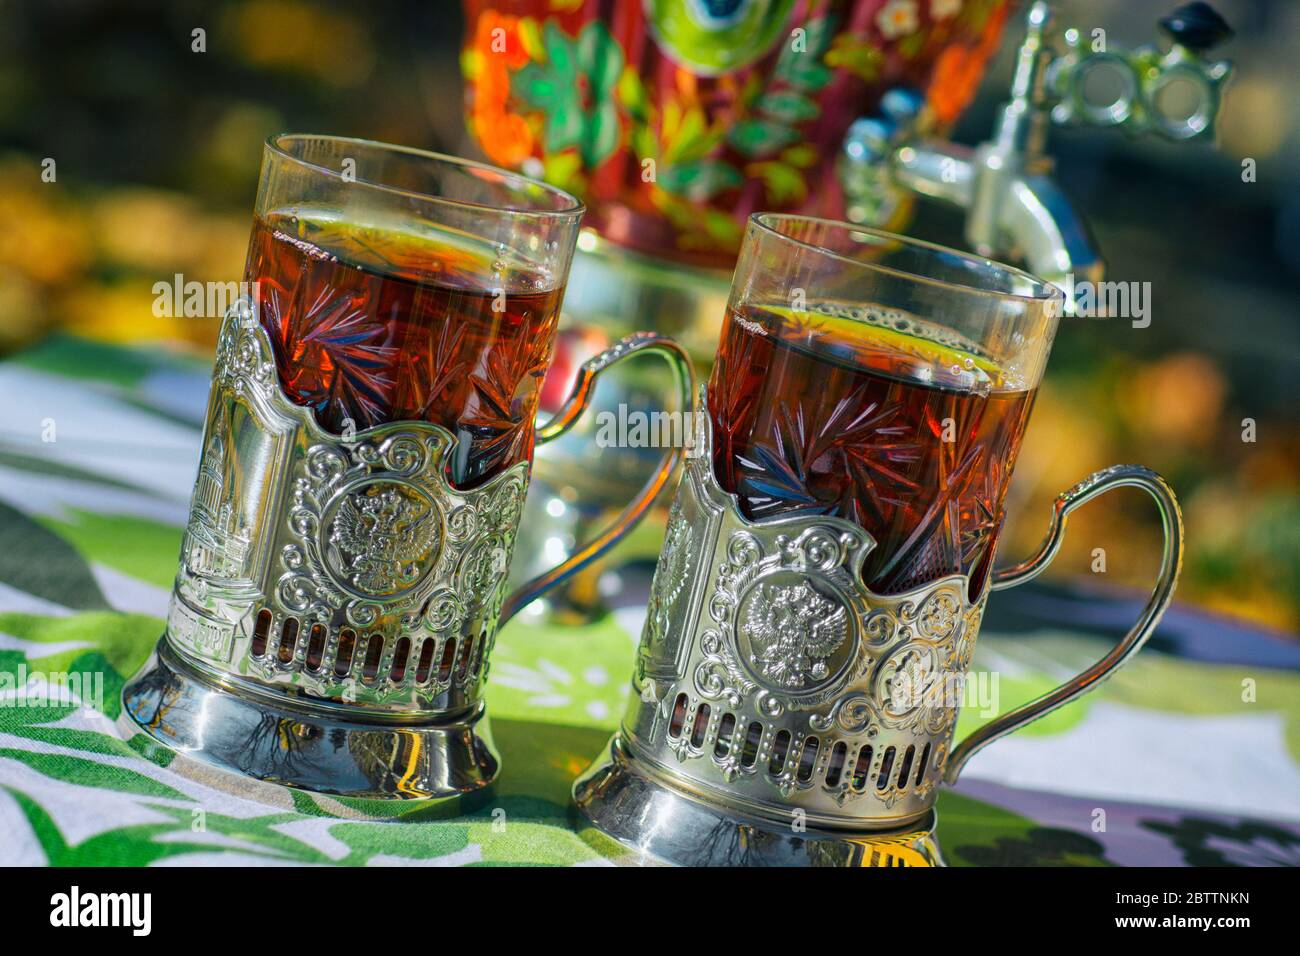 Glass Tea Holders with Tea in Glasses and Russian Samovar Stock Photo